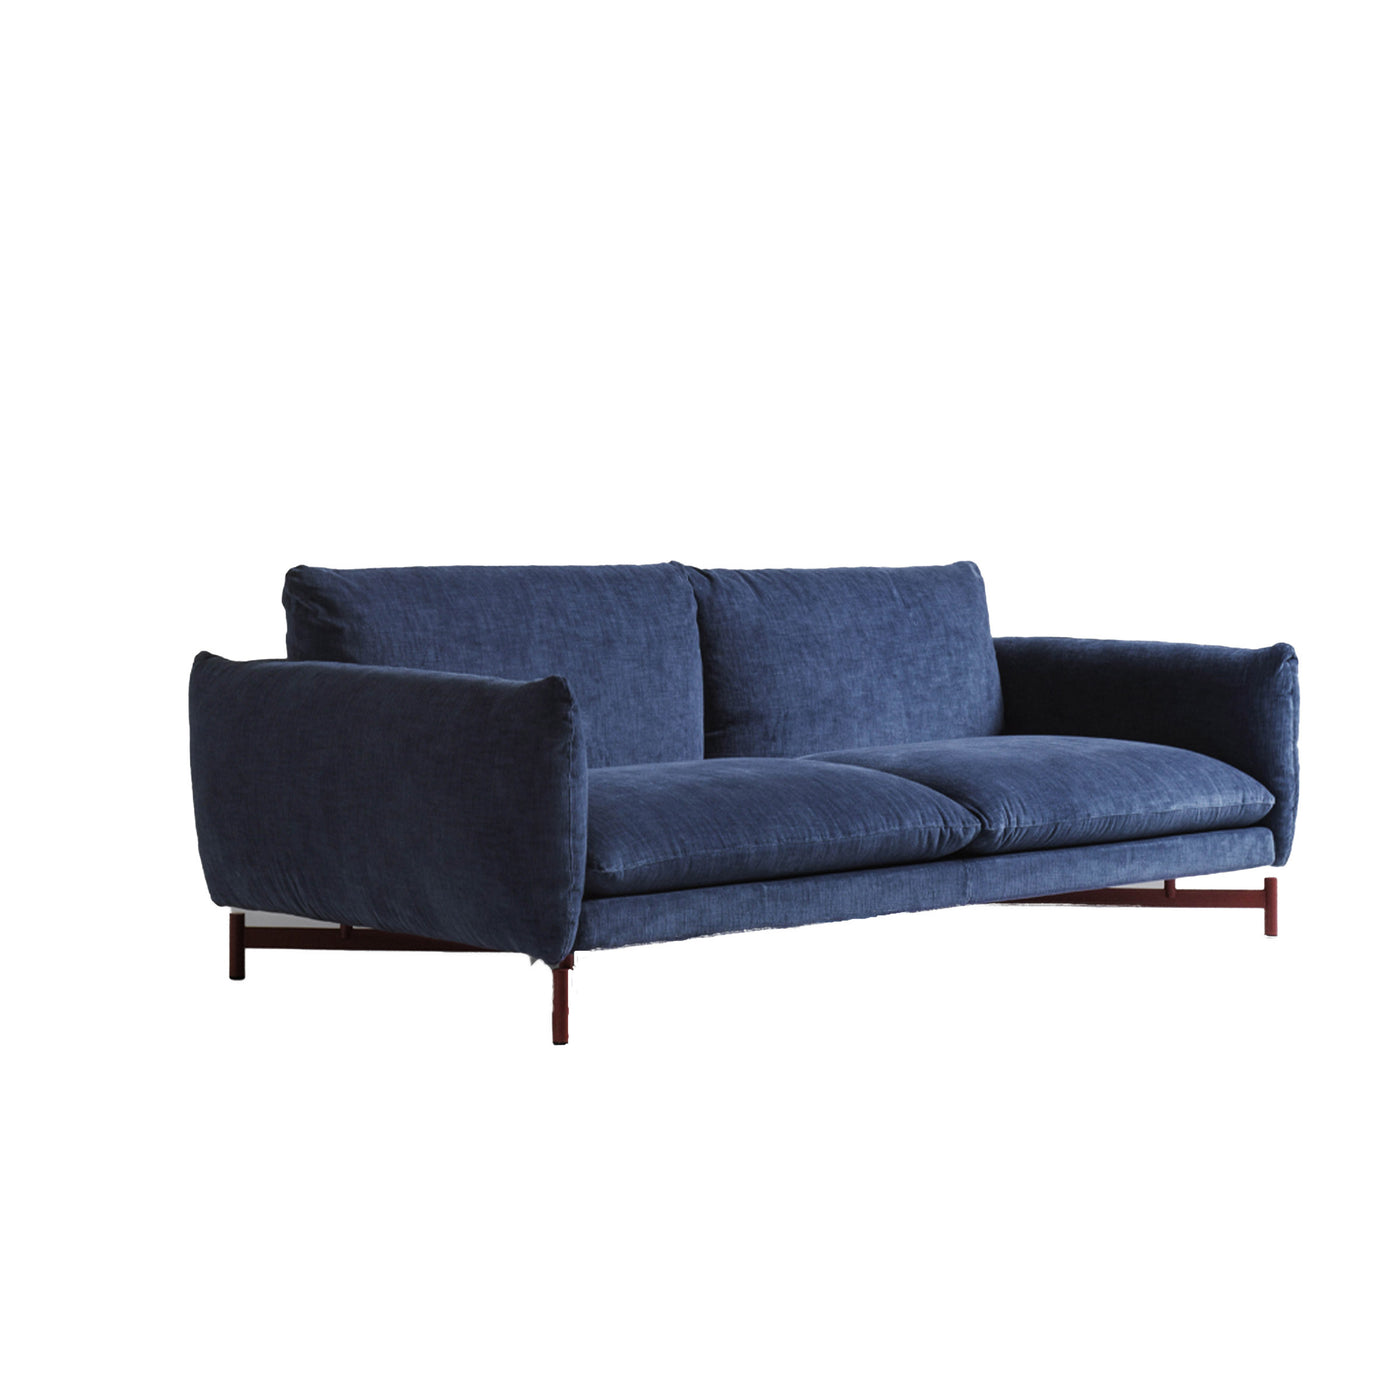 Sofa KOM by Angeletti Ruzza for MyHome Collection 01